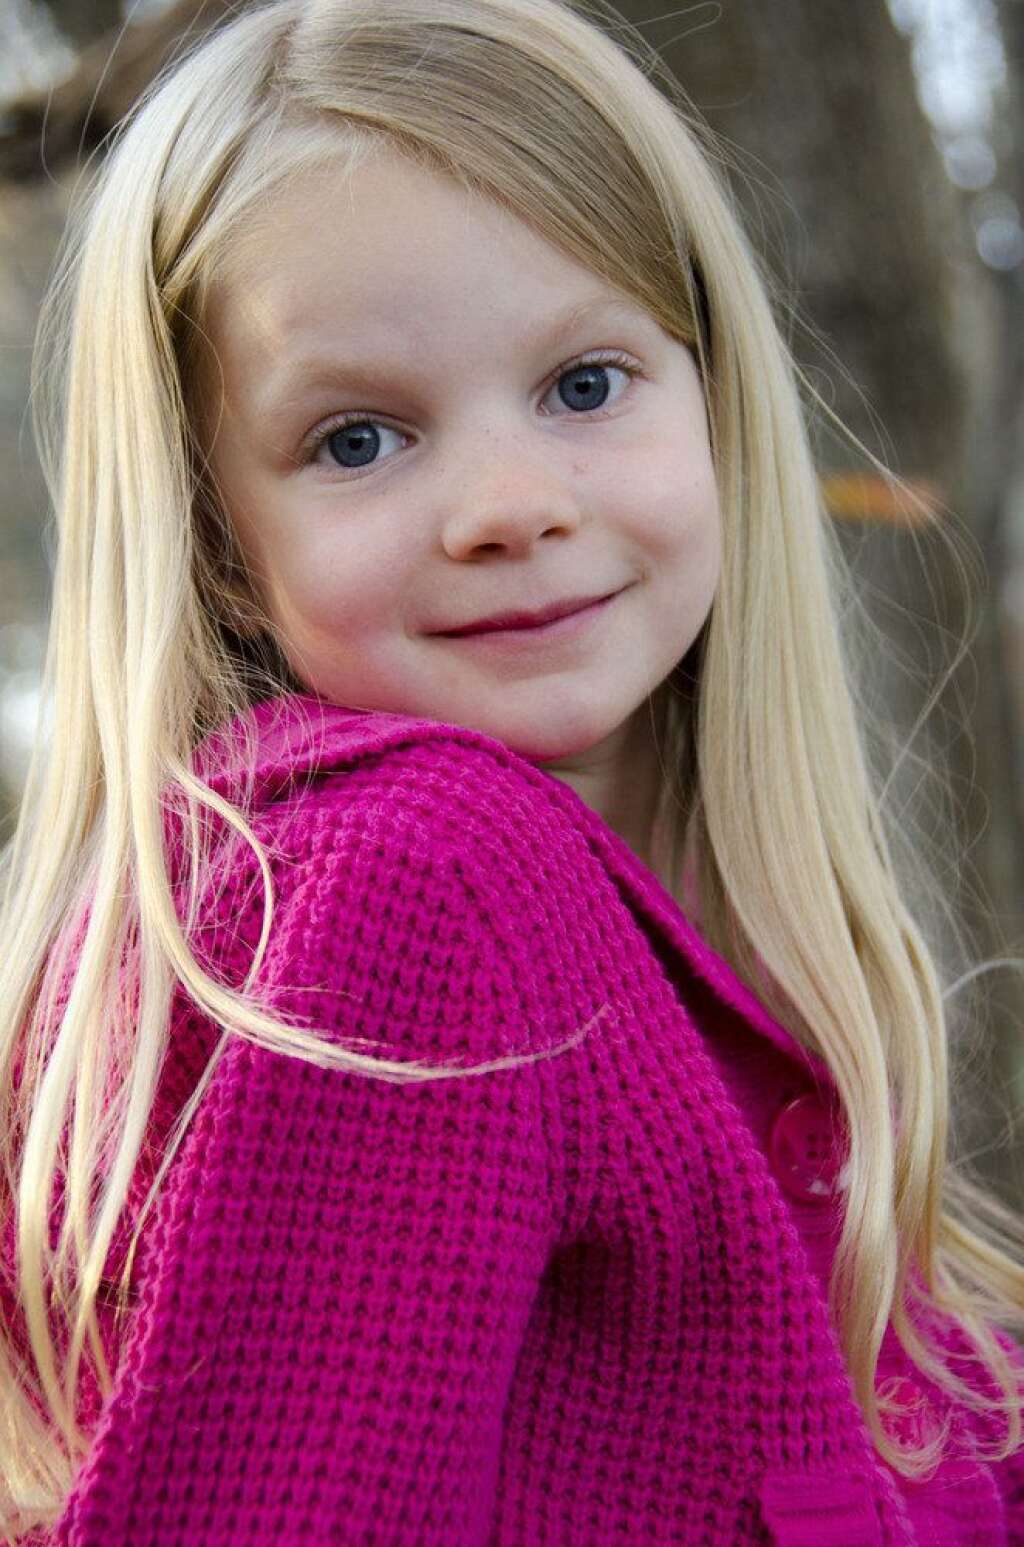 Emilie Alice Parker - This 2012 photo provided by the family shows Emilie Alice Parker. Parker was killed Friday, Dec. 14, 2012, when a gunman opened fire at Sandy Hook elementary school in Newtown, Conn., killing 26 children and adults at the school. (AP Photo/Courtesy of the Parker Family)